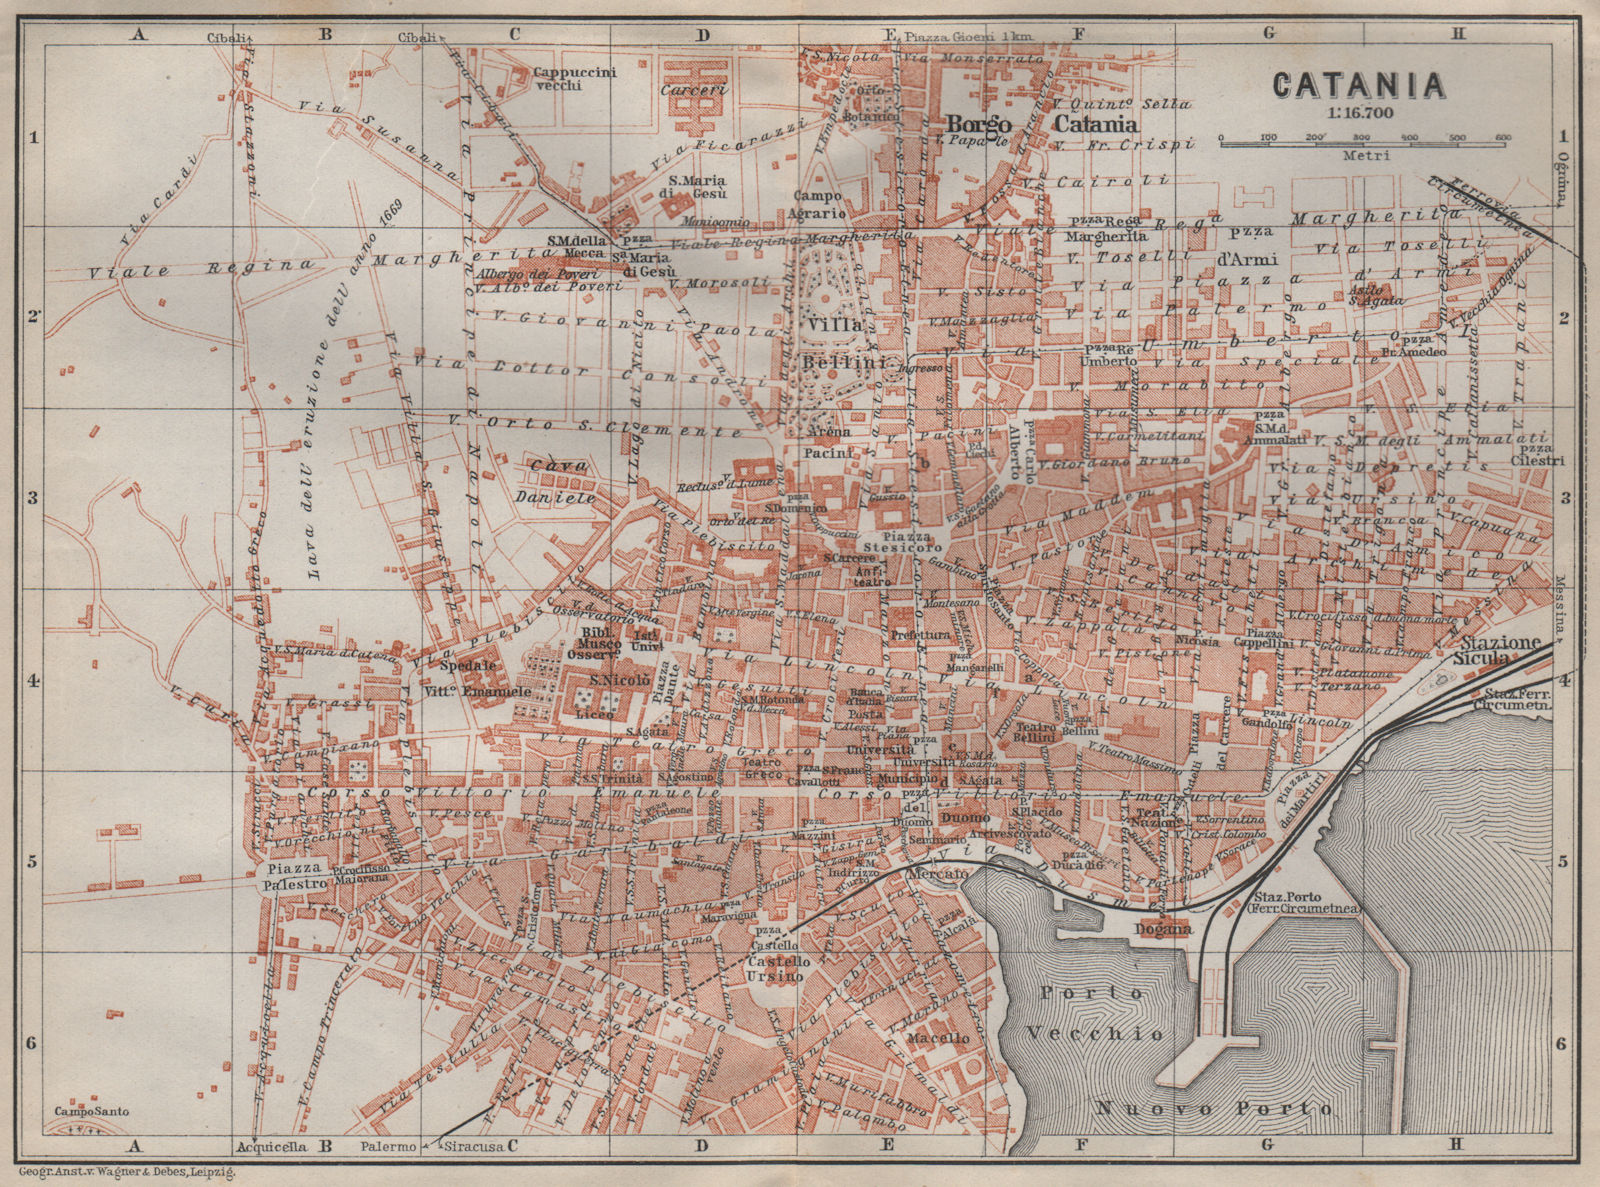 Associate Product CATANIA antique town city plan piano urbanistico. Italy mappa 1911 old